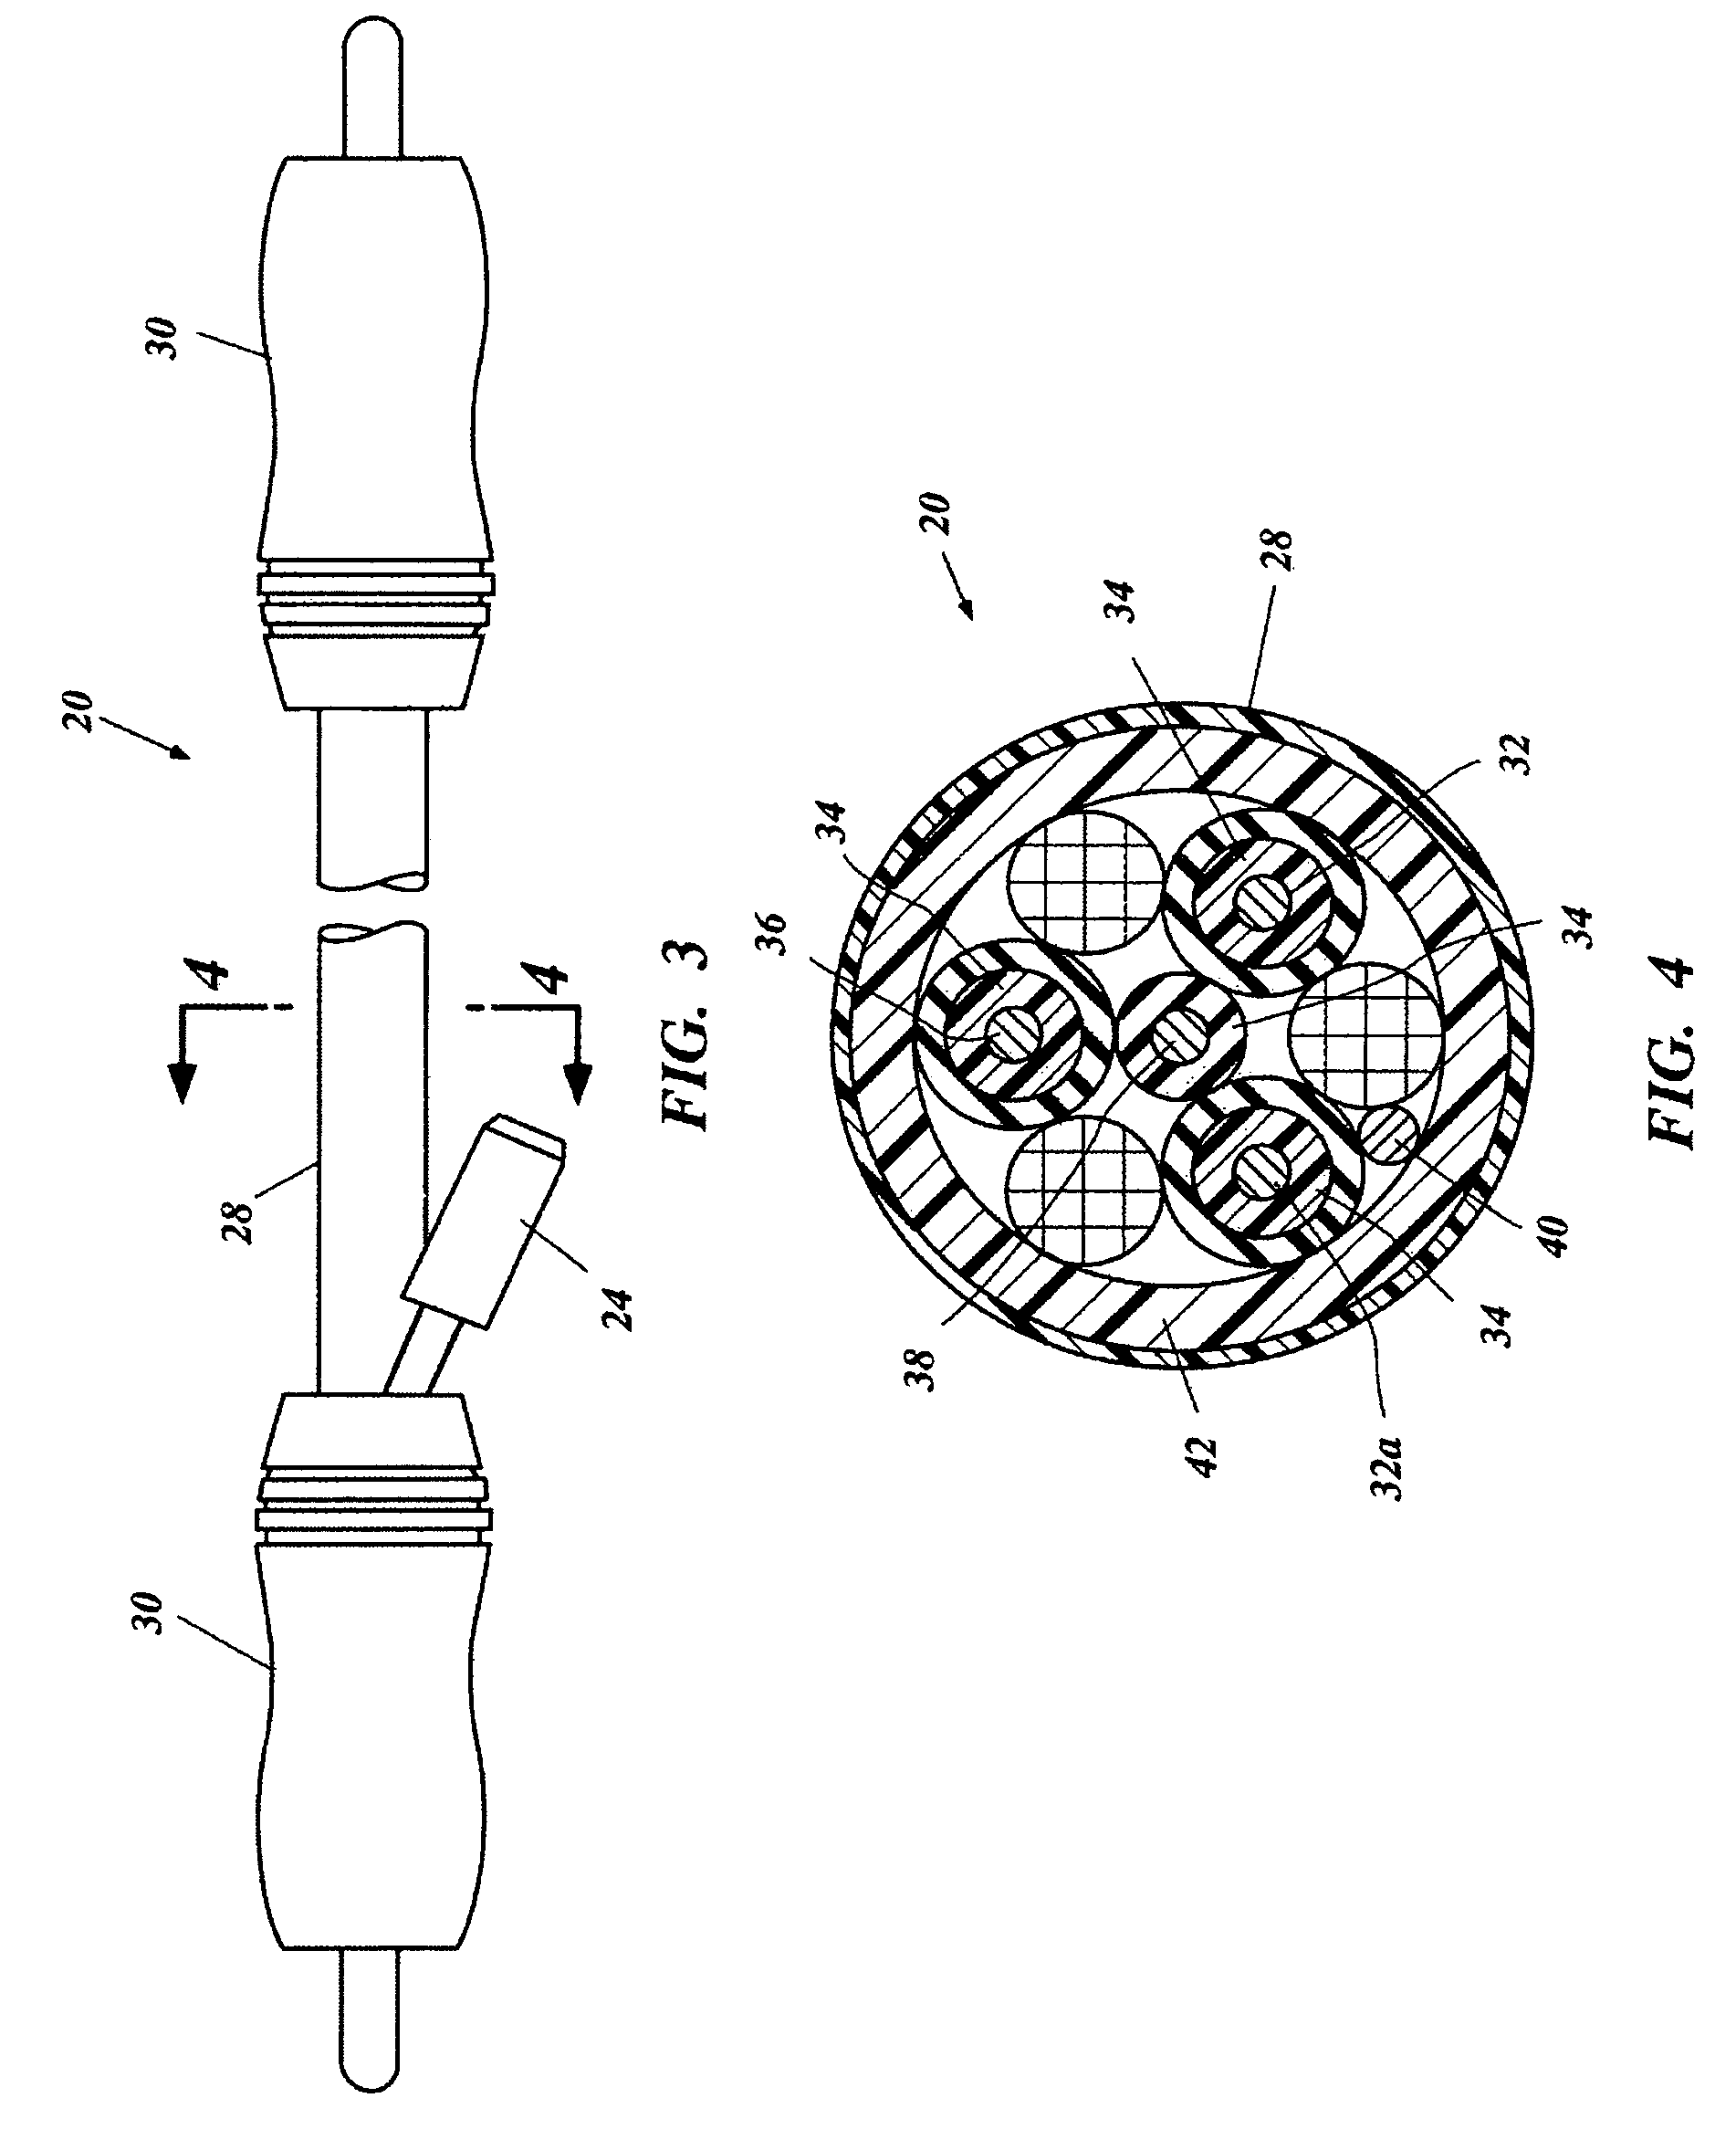 Apparatus and methods for dielectric bias system